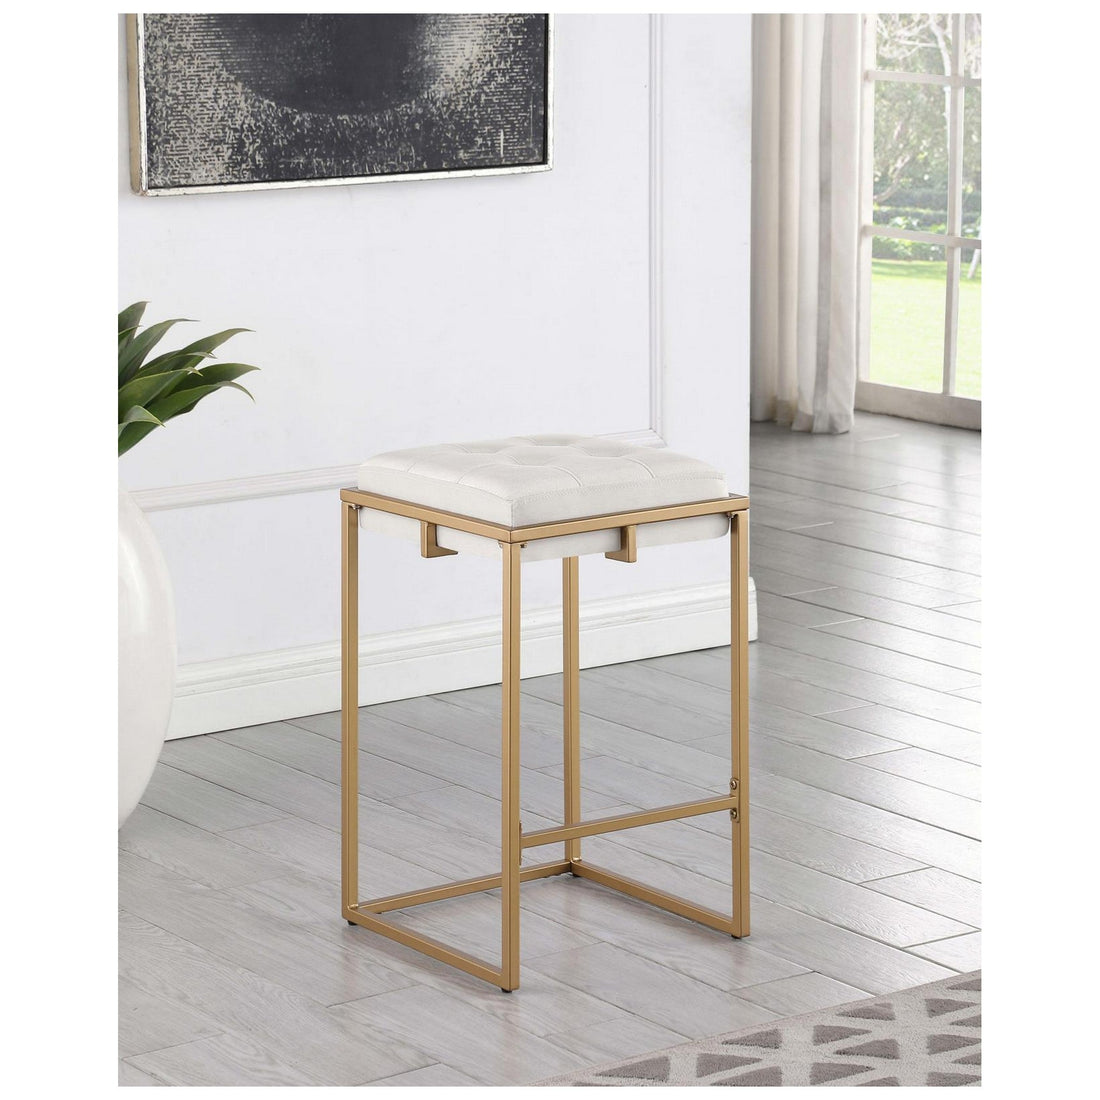 Nadia Square Padded Seat Counter Height Stool (Set of 2) Beige and Gold 183645